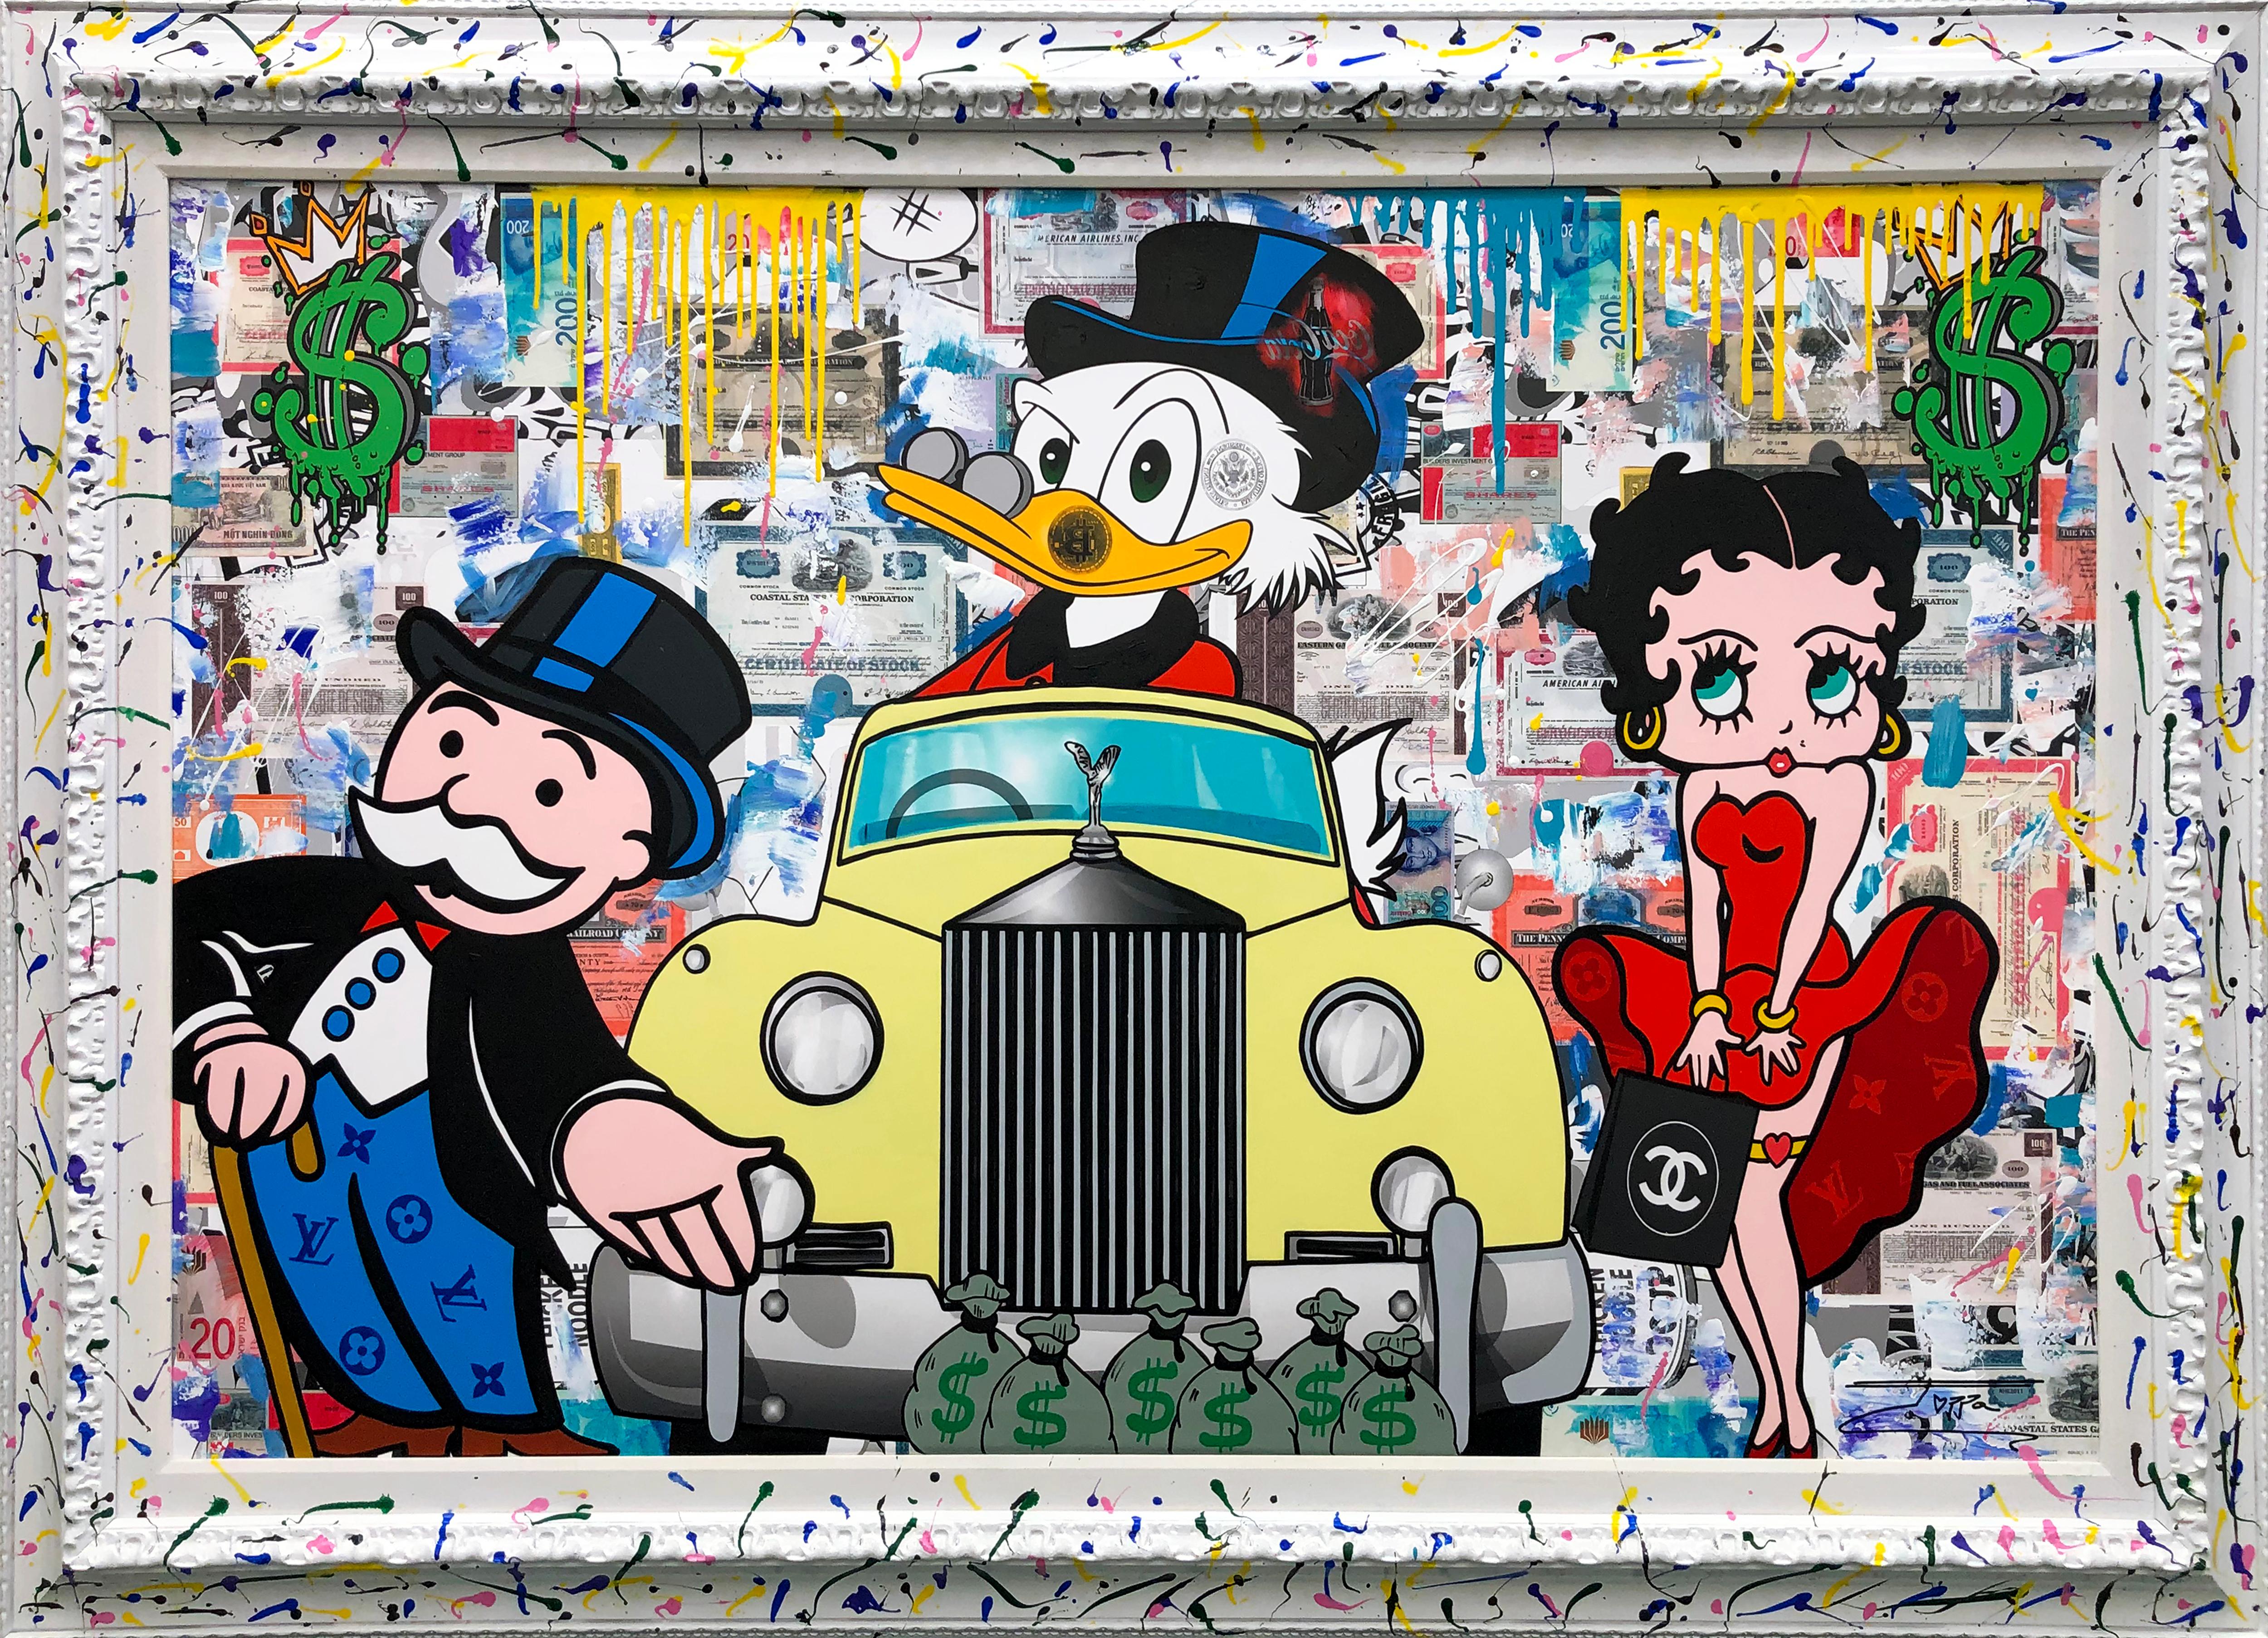 Jozza Figurative Painting - SCROOGE NEW CAR (BETTY BOOP MONOPOLY)